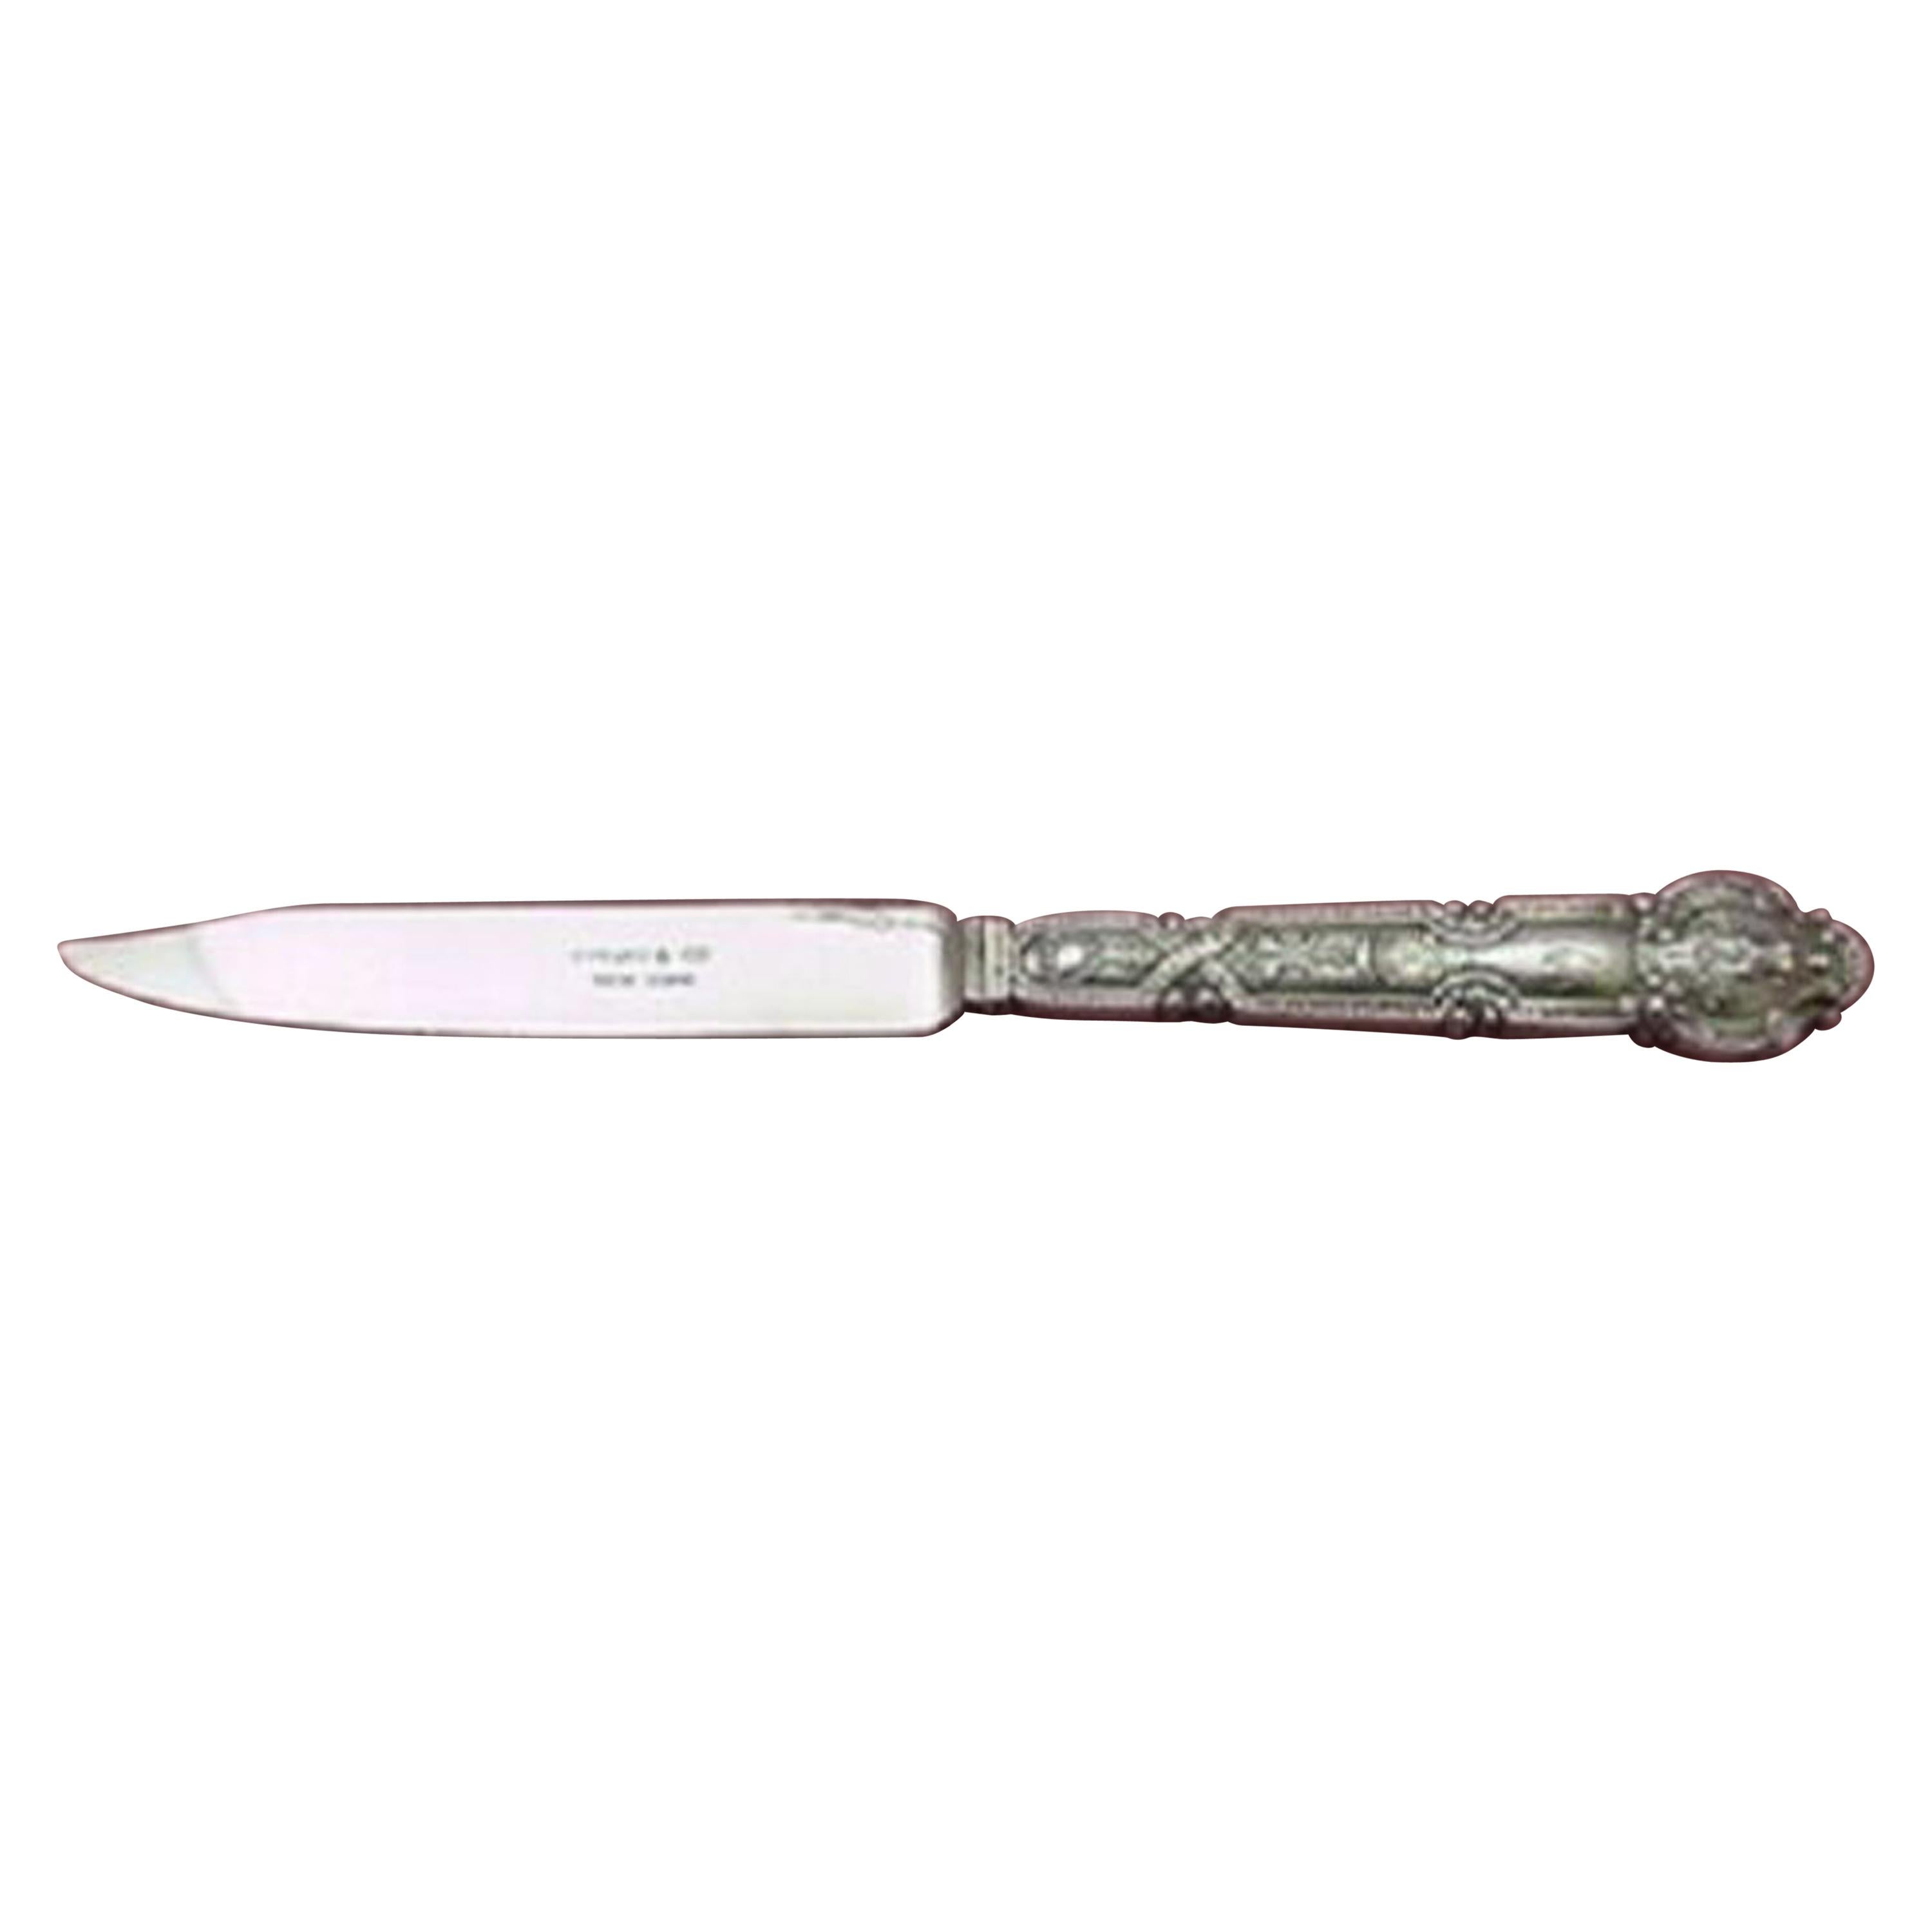 Renaissance by Tiffany & Co. Sterling Silver Fruit Knife Serrated